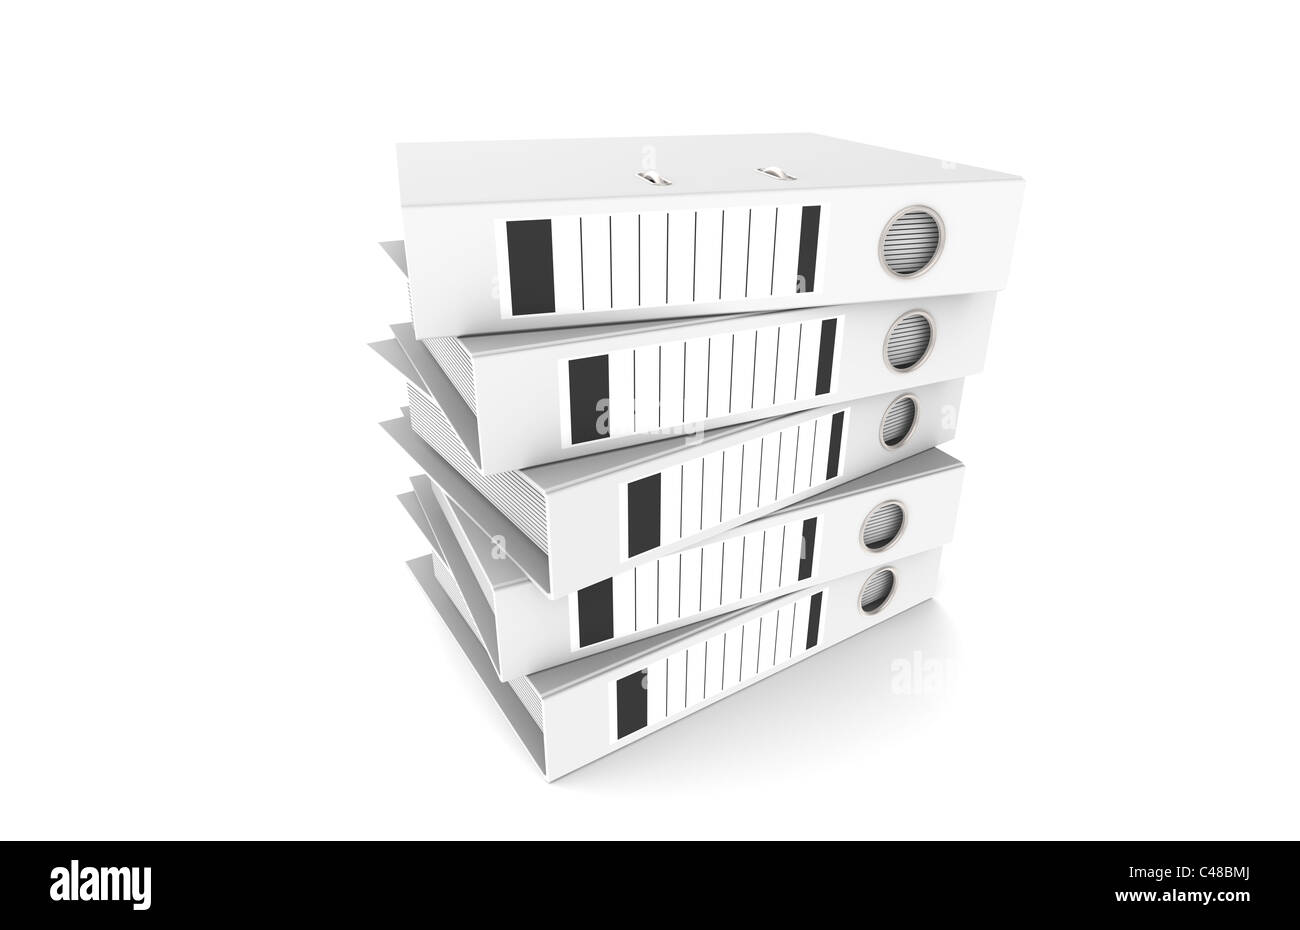 Pile of Binders. 5 white Binders in a pile. Stock Photo